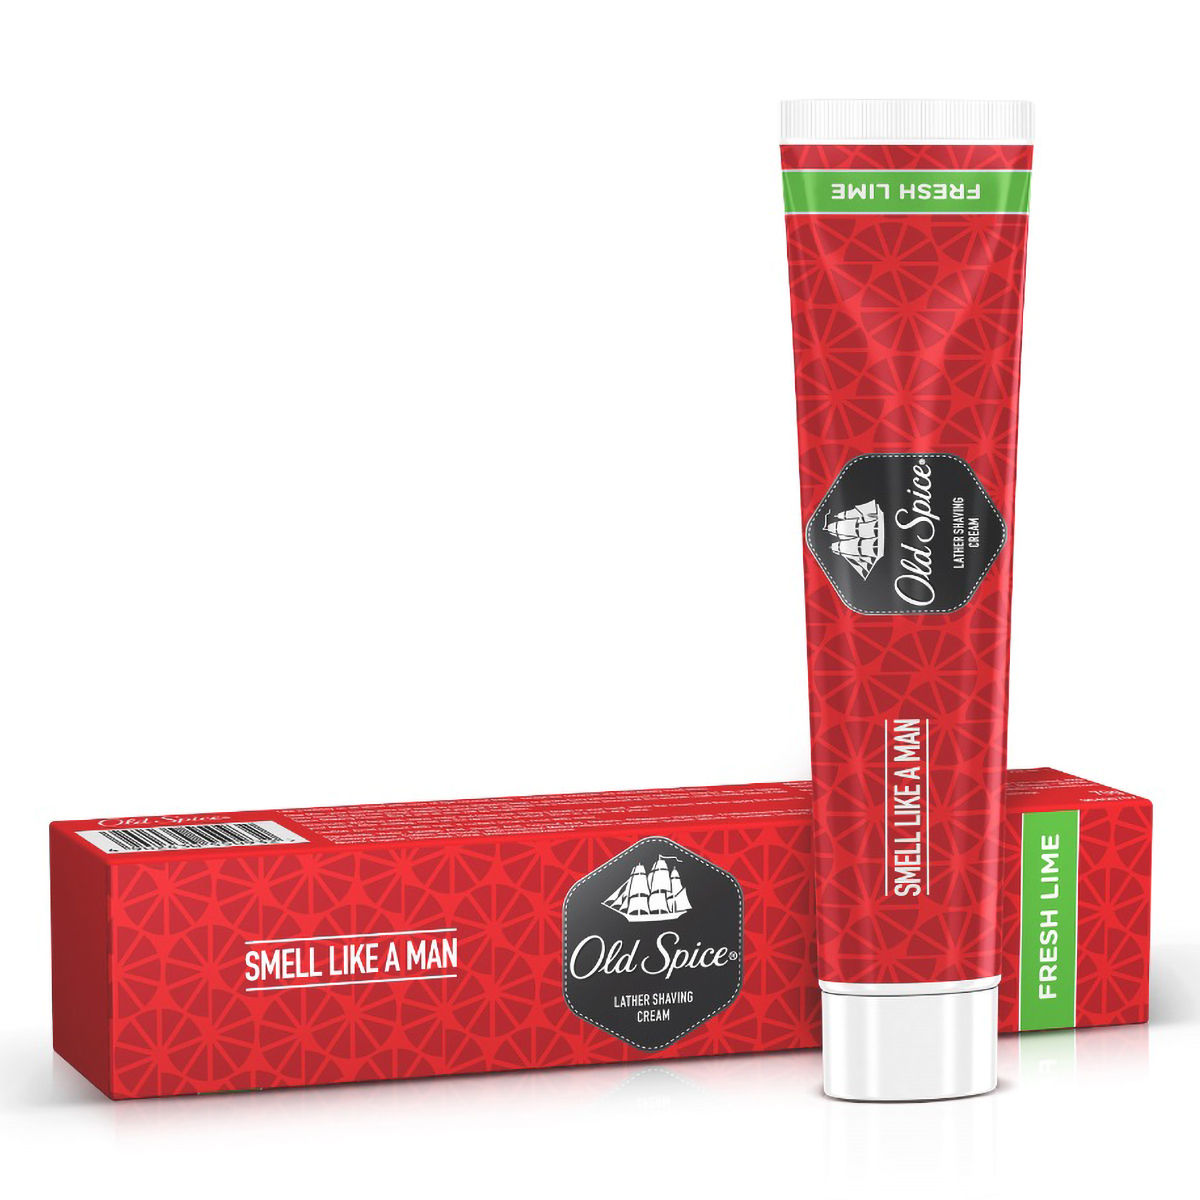 Buy Old Spice Fresh Lime Lather Shaving Cream, 70 gm Online